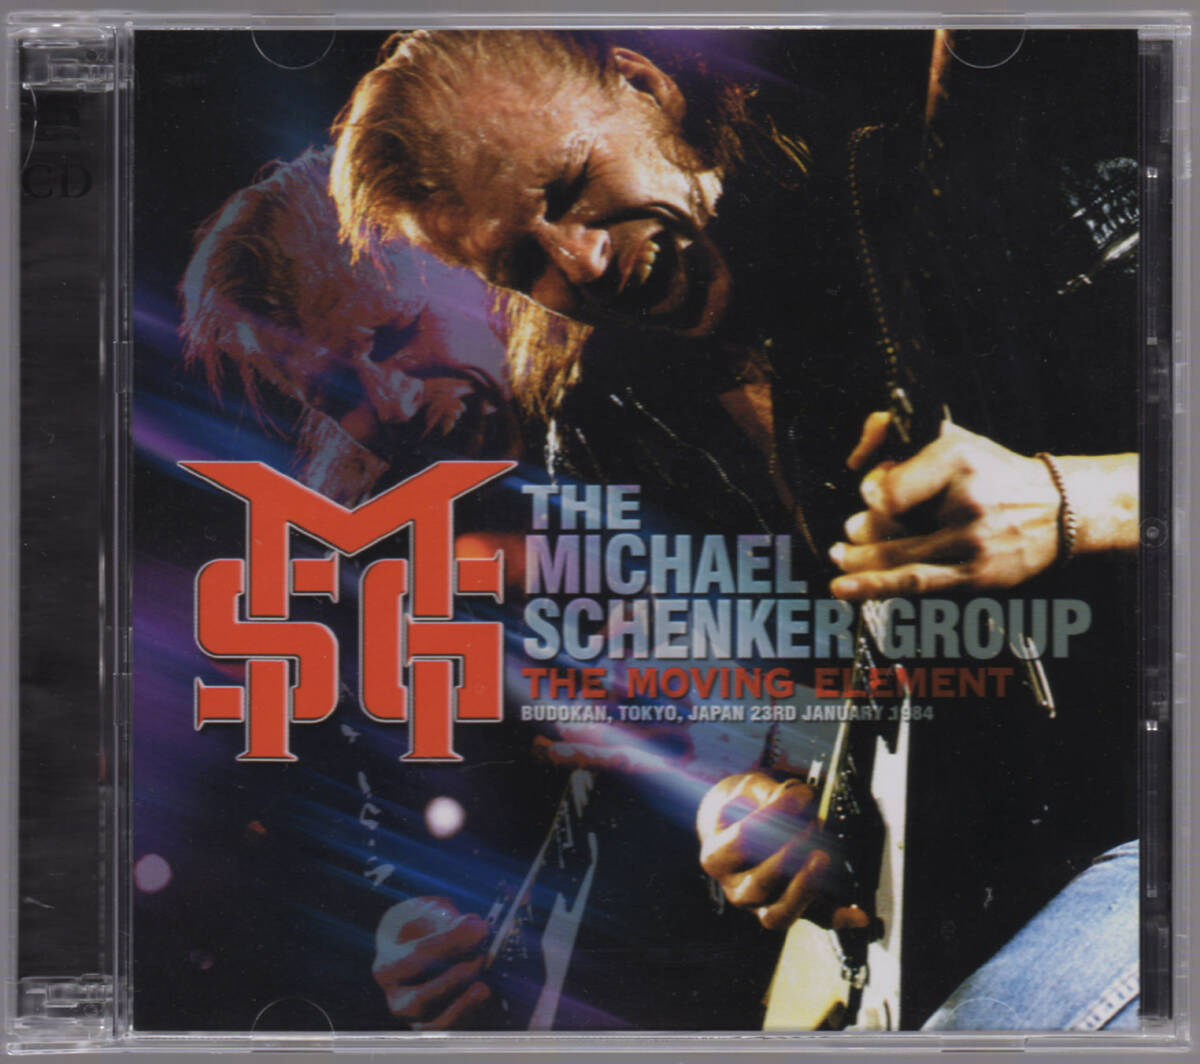  THE MICHAEL SCHENKER GROUP / THE MOVING ELEMENT　2CD　_画像1